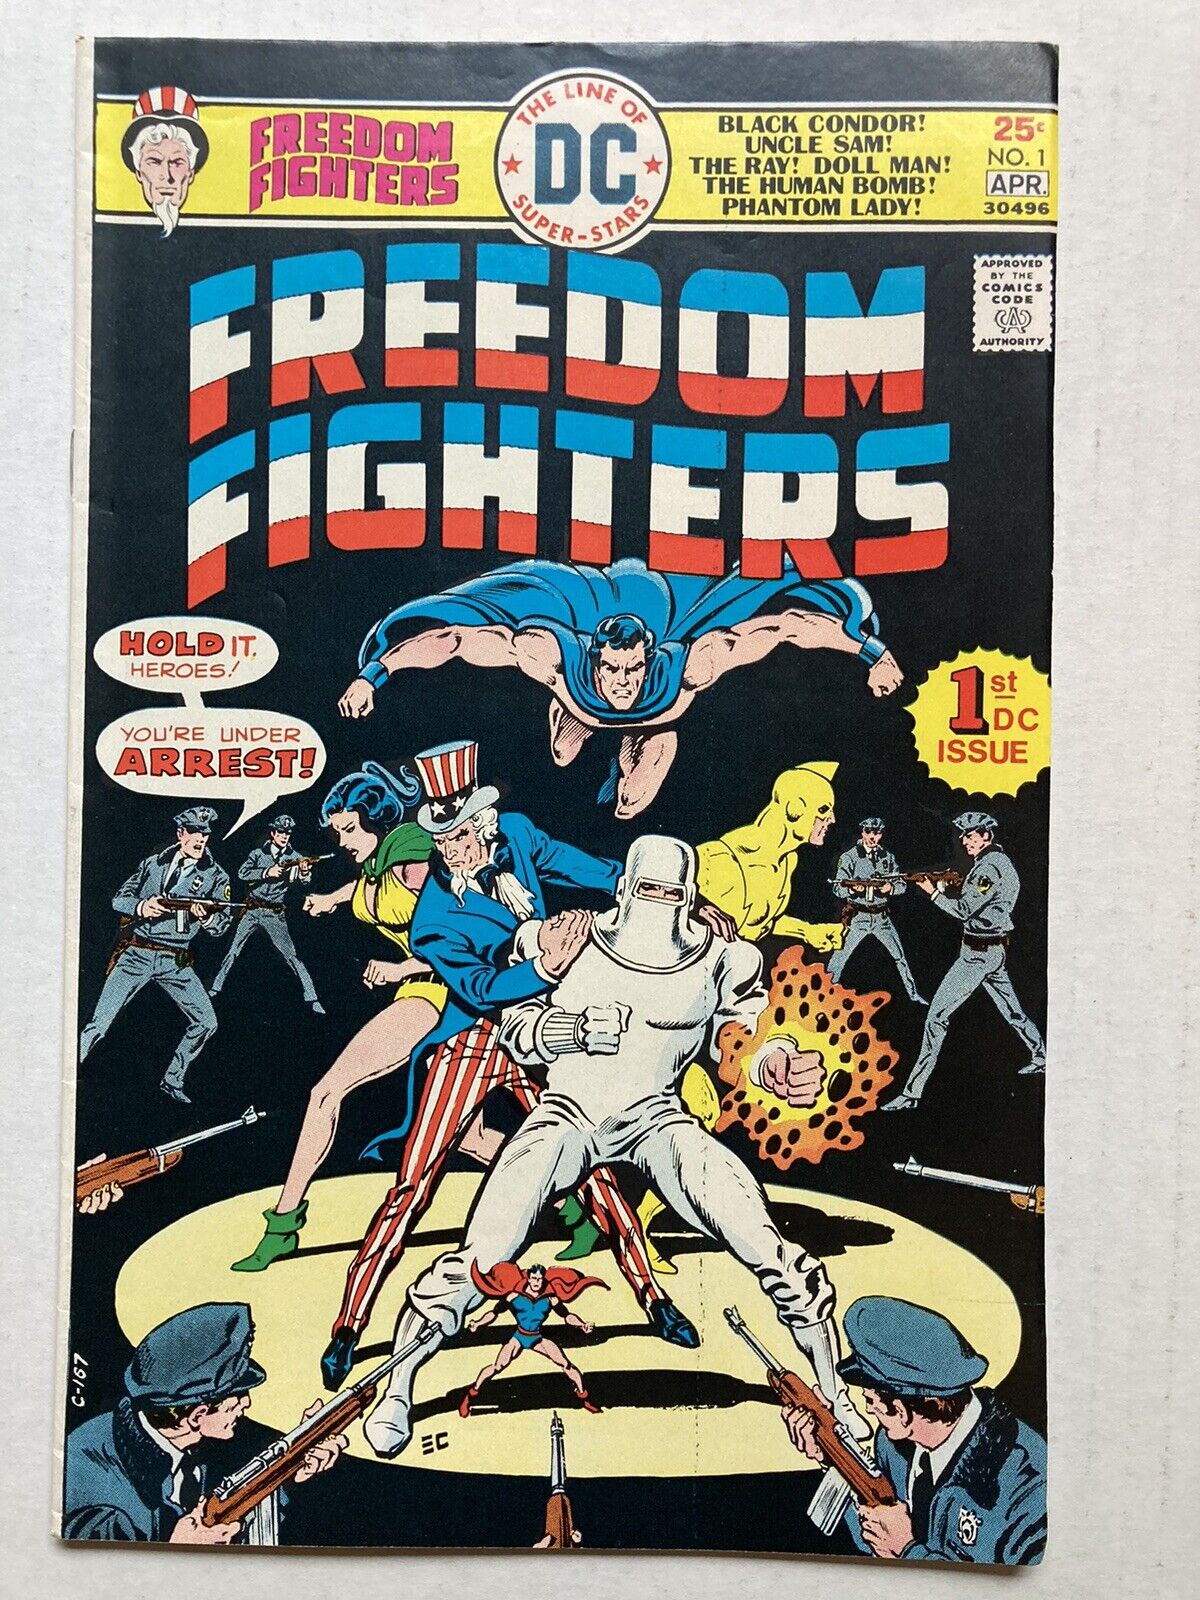 FREEDOM FIGHTERS #1, DC Comics, 1976, Ernie Chan cover VF Condition